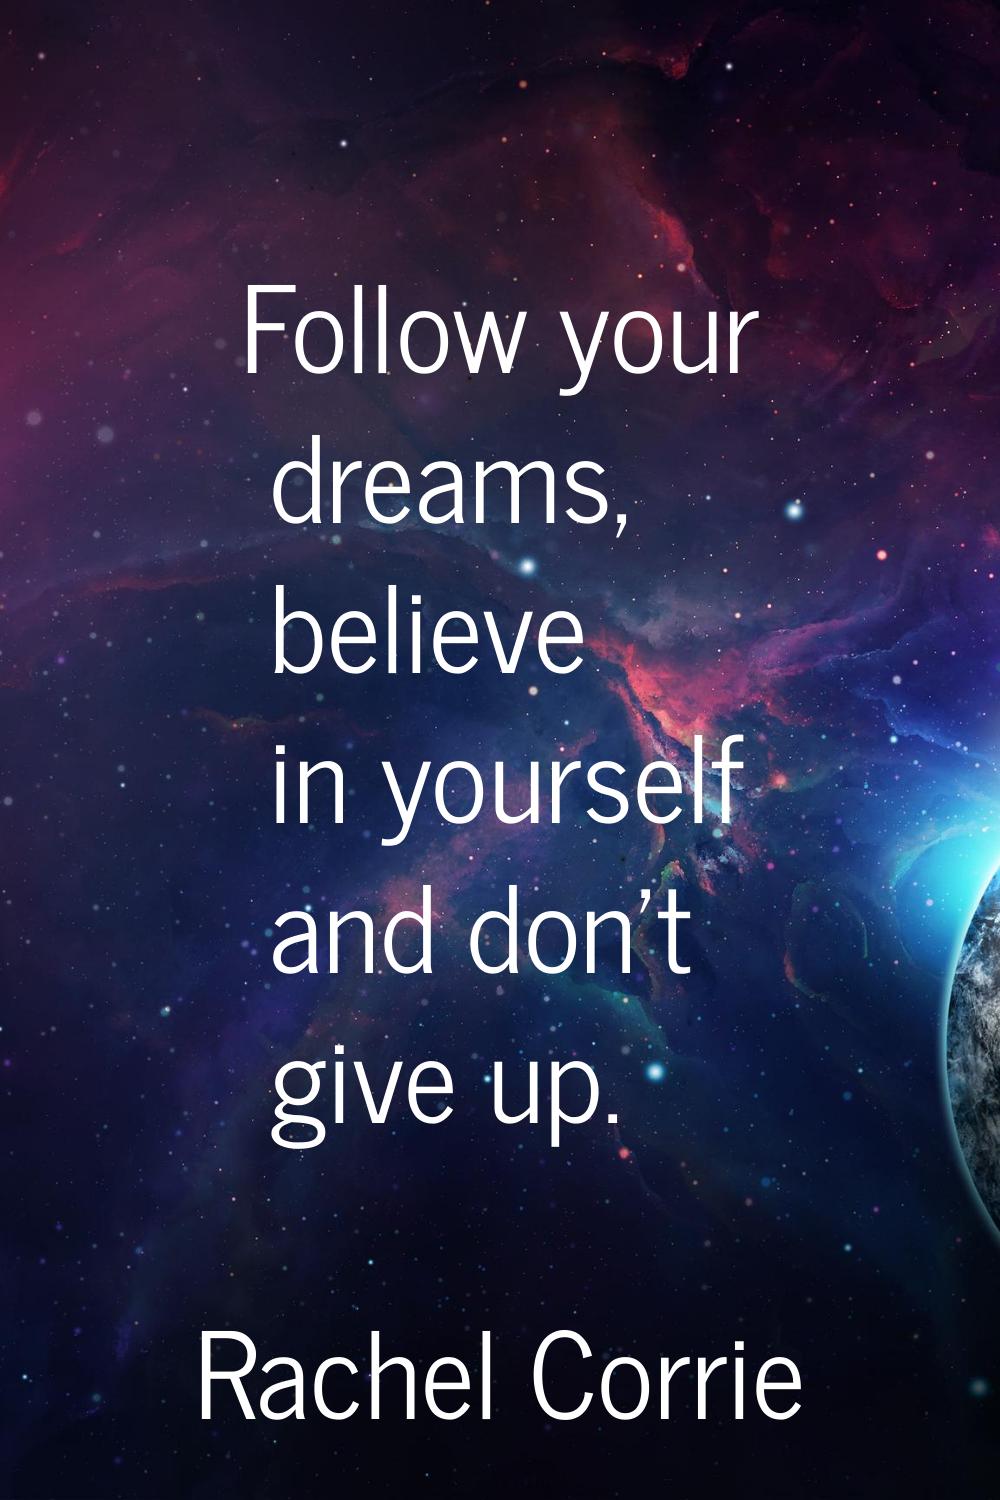 Follow your dreams, believe in yourself and don't give up.